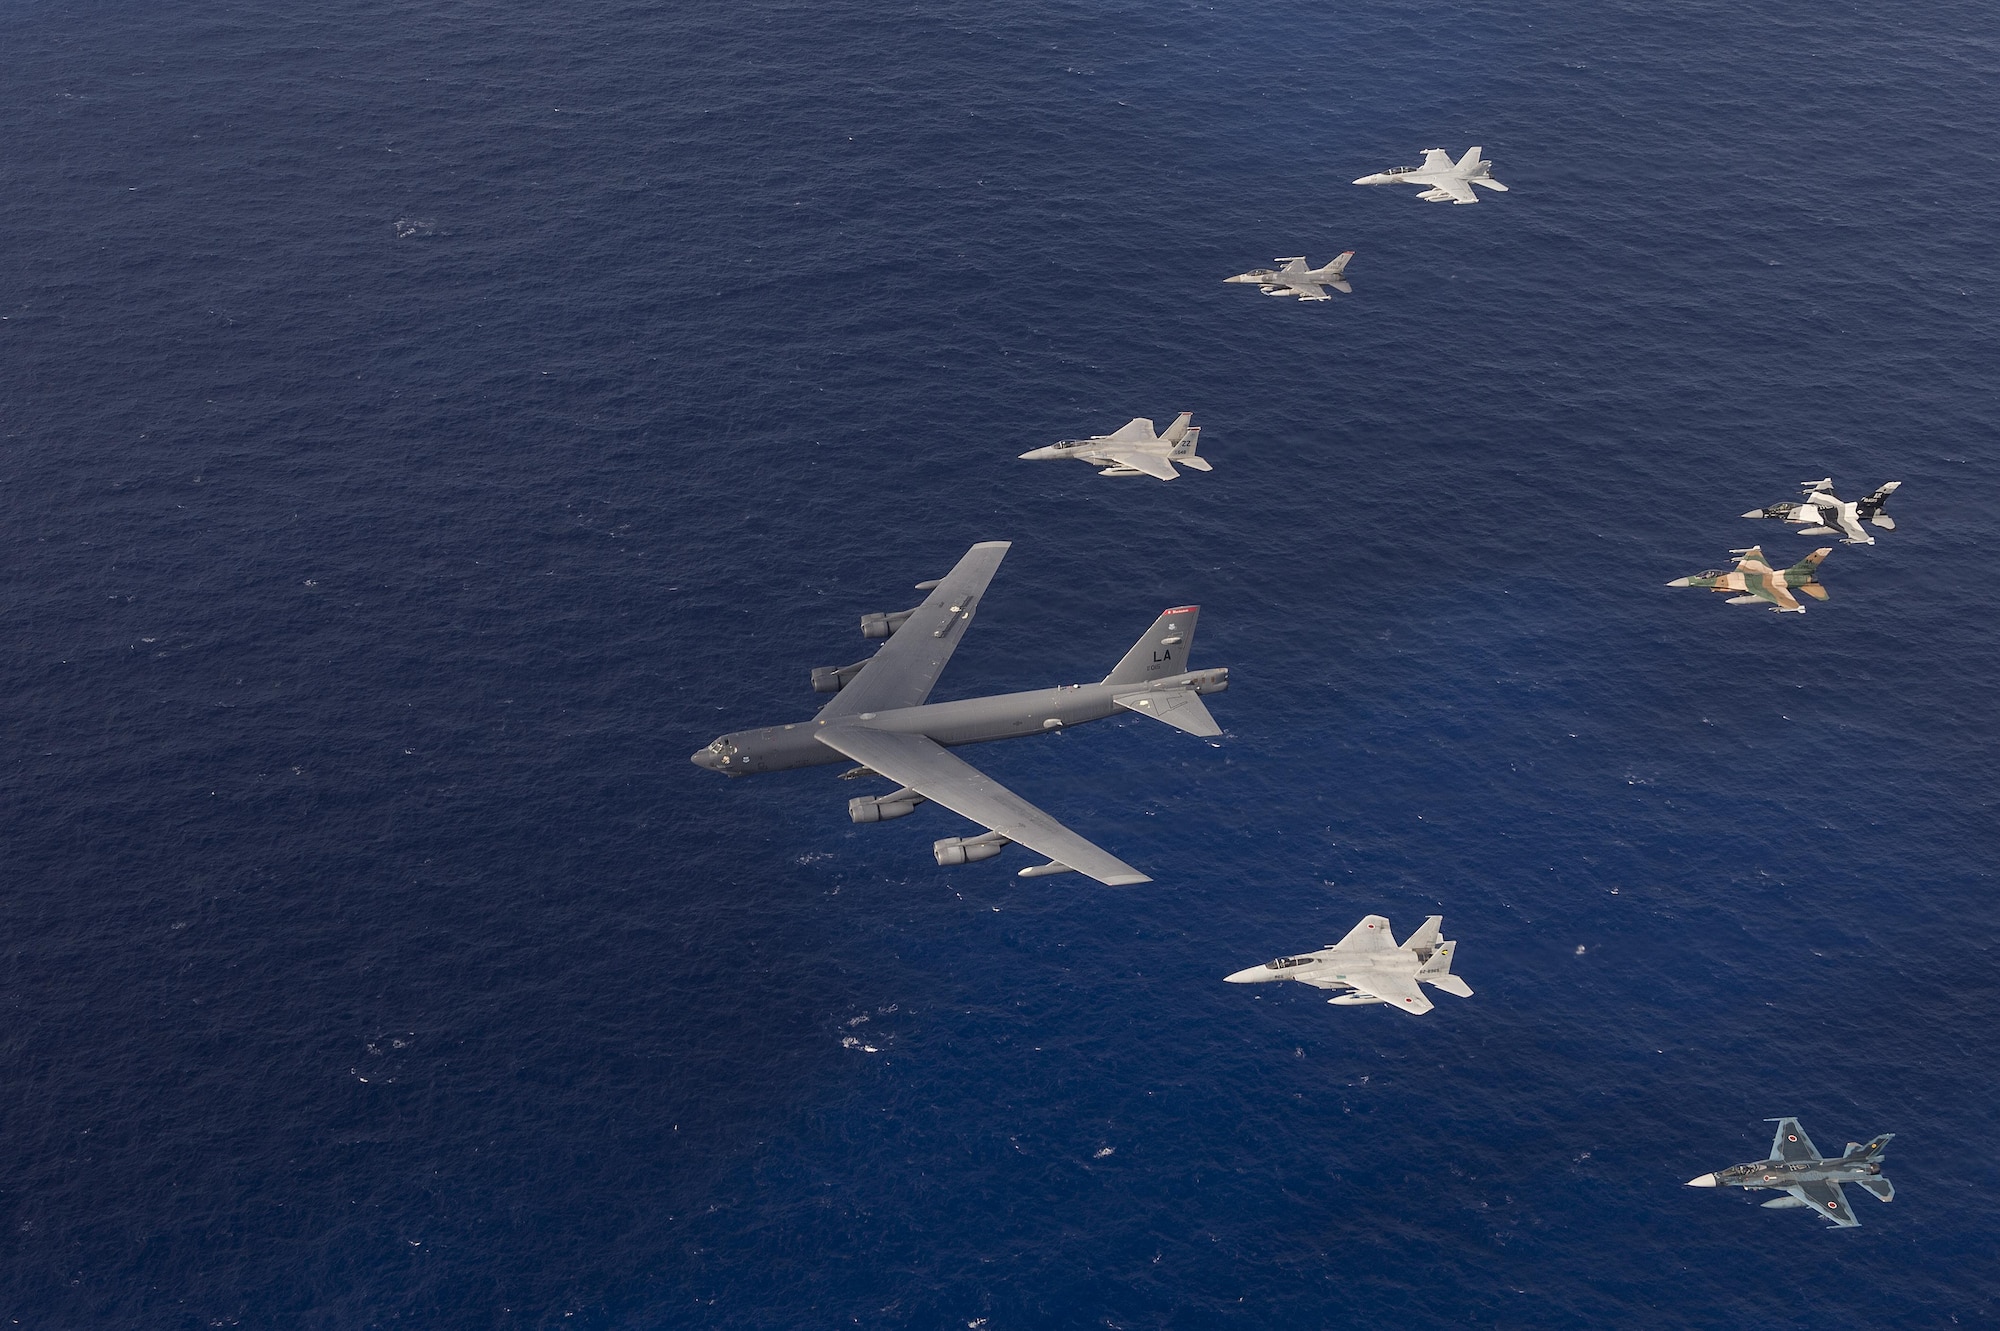 U.S. Air Force, Japan Air Self-Defense Force and Royal Australian air force aircraft fly in formation during Cope North 15, Feb. 17, 2015, off the coast of Guam. During the exercise, the U.S., Japan and Australia air forces worked on developing combat capabilities enhancing air superiority, electronic warfare, air interdiction, tactical airlift and aerial refueling. (U.S. Air Force photo/Tech. Sgt. Jason Robertson)                                                          